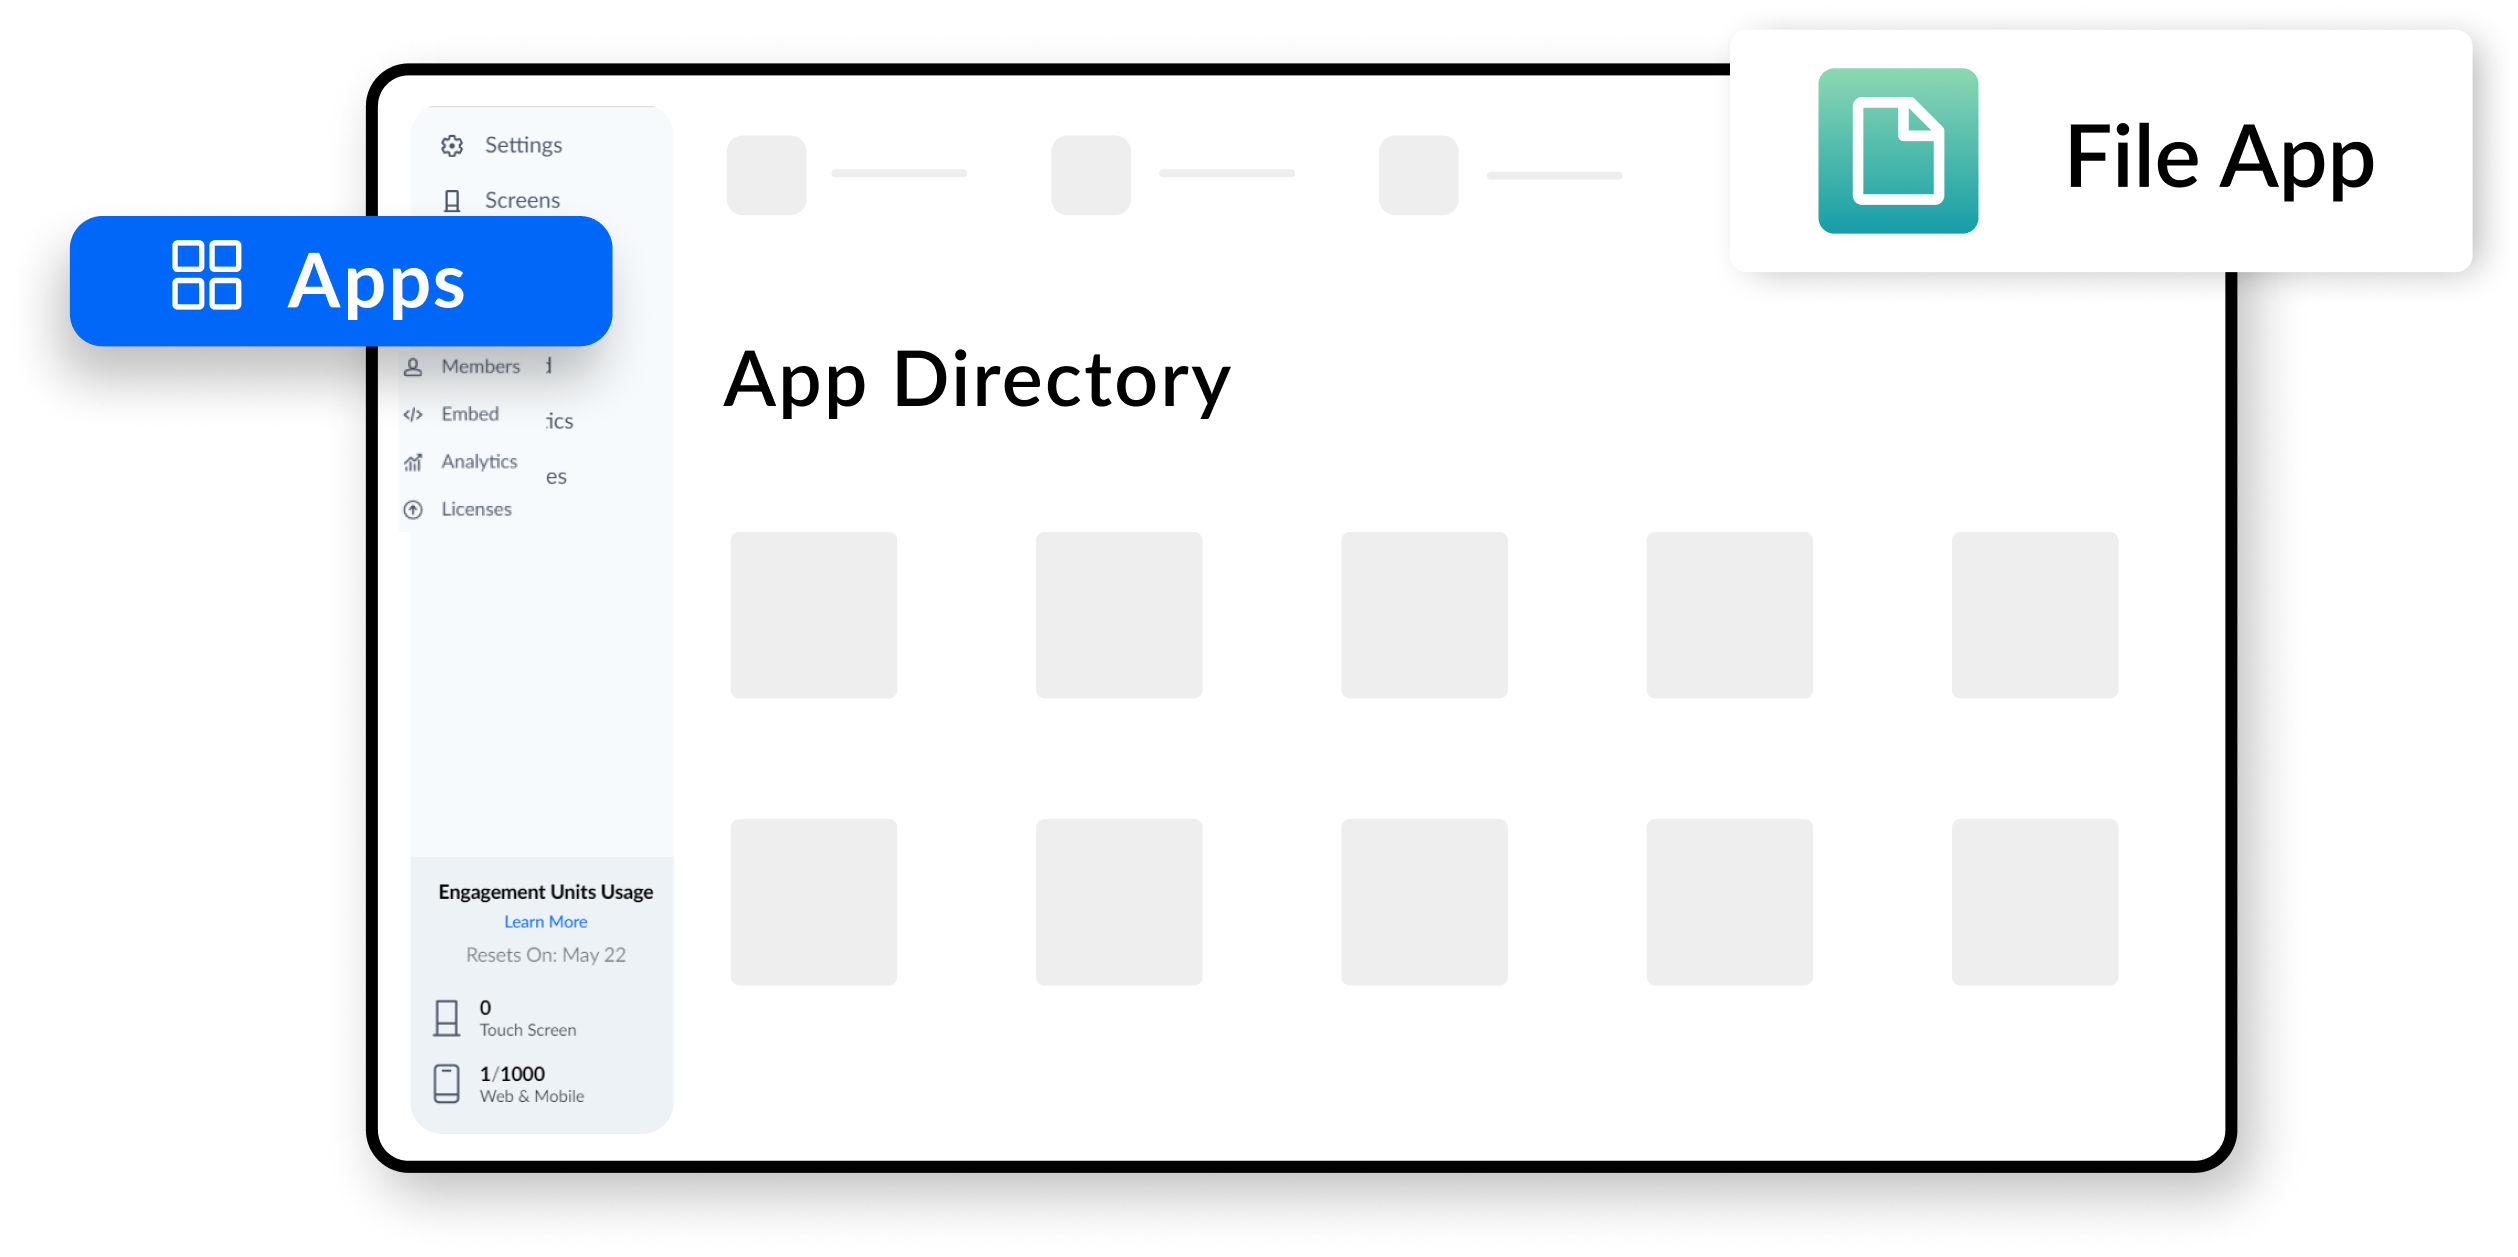 HootBoard File App: Where to find file app